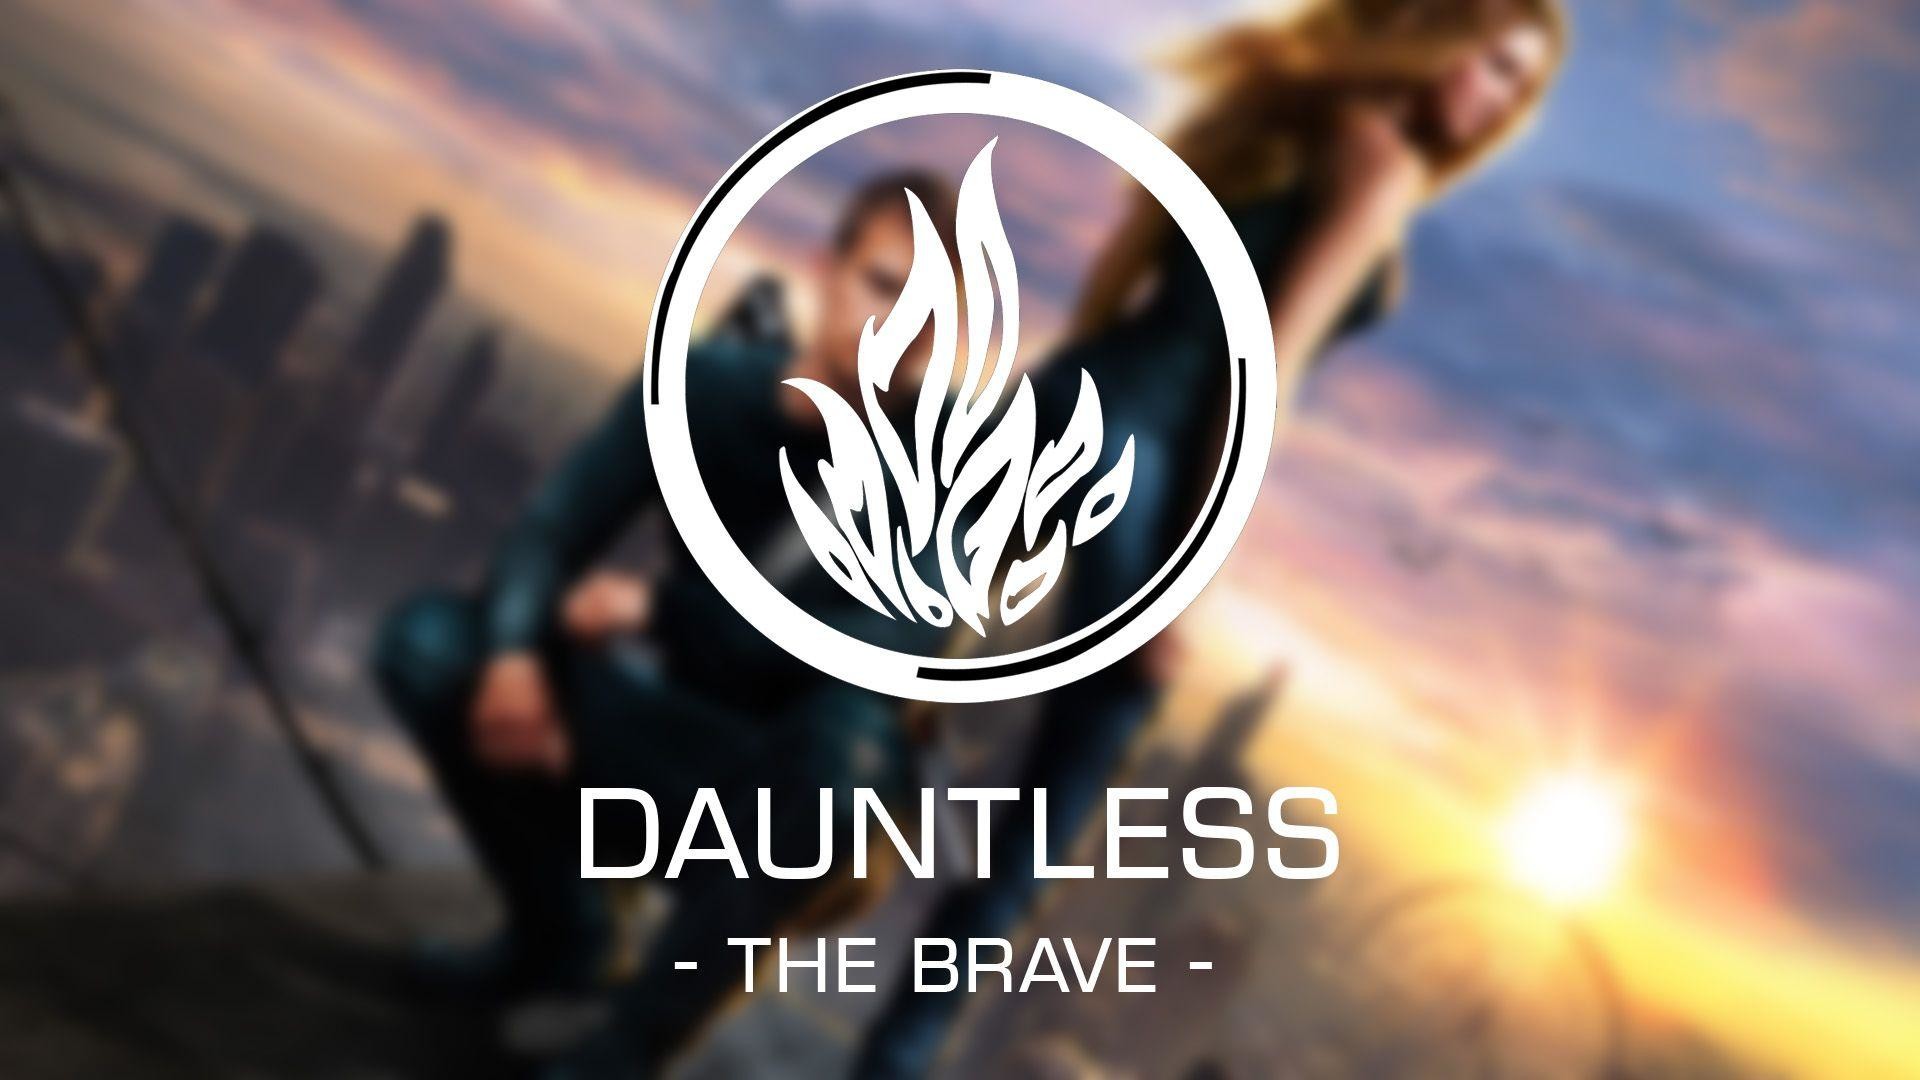 1920x1080 Dauntless Wallpapers Group with 46 items